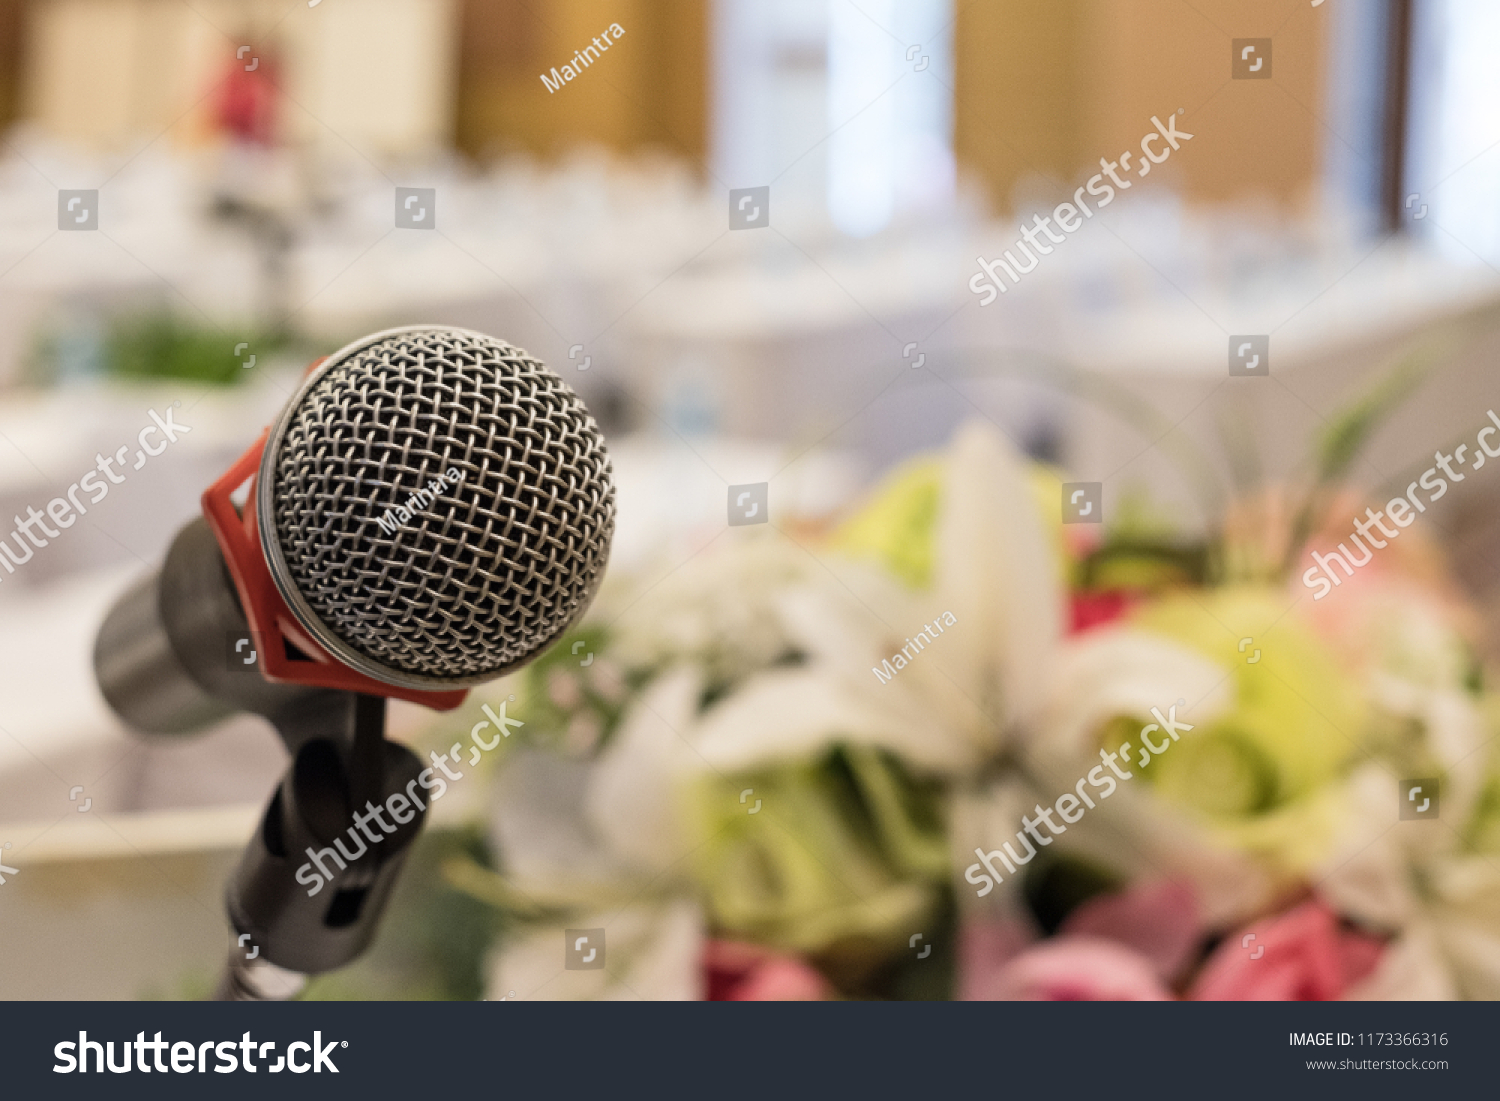 Microphone on the stage in the ballroom. It is for lecturer, presenters, speakers in meetings, seminars or training. #1173366316